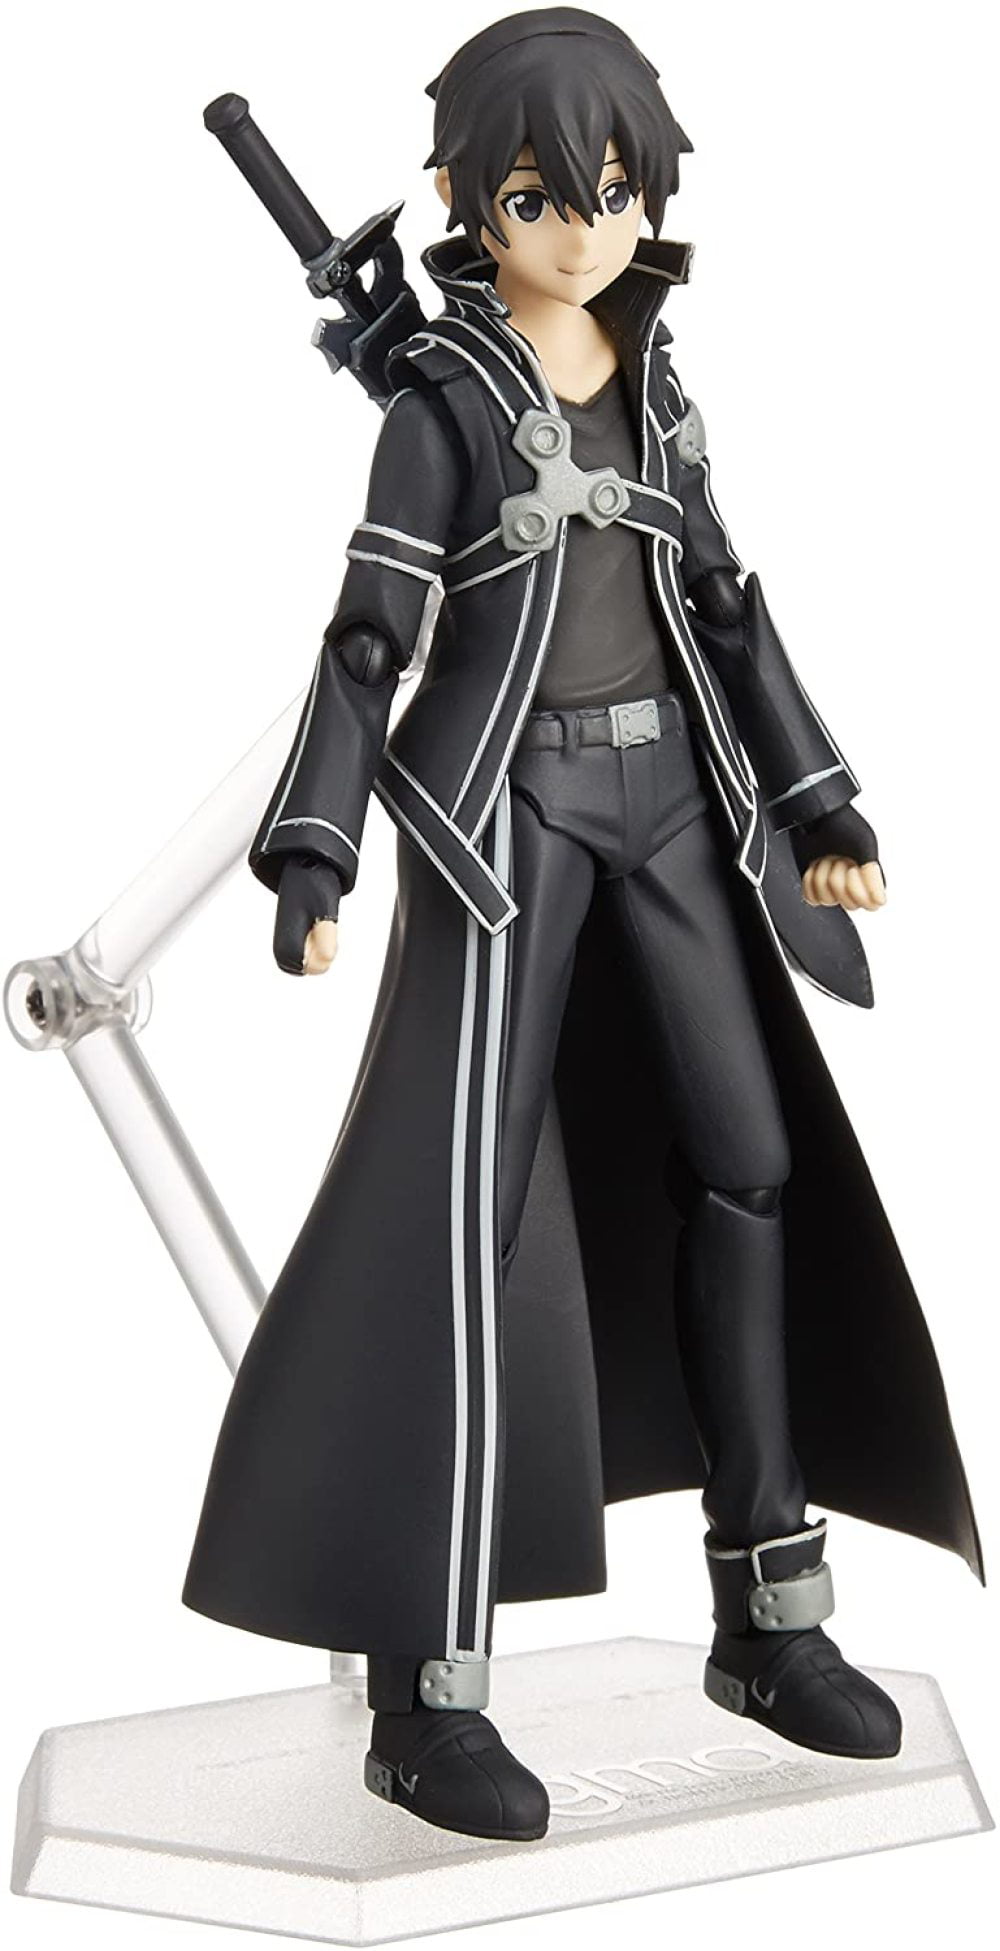 Details about   New Anime Sword Art Online SAO Asuna Kirito PVC Action Figure Toys In Box Gift 